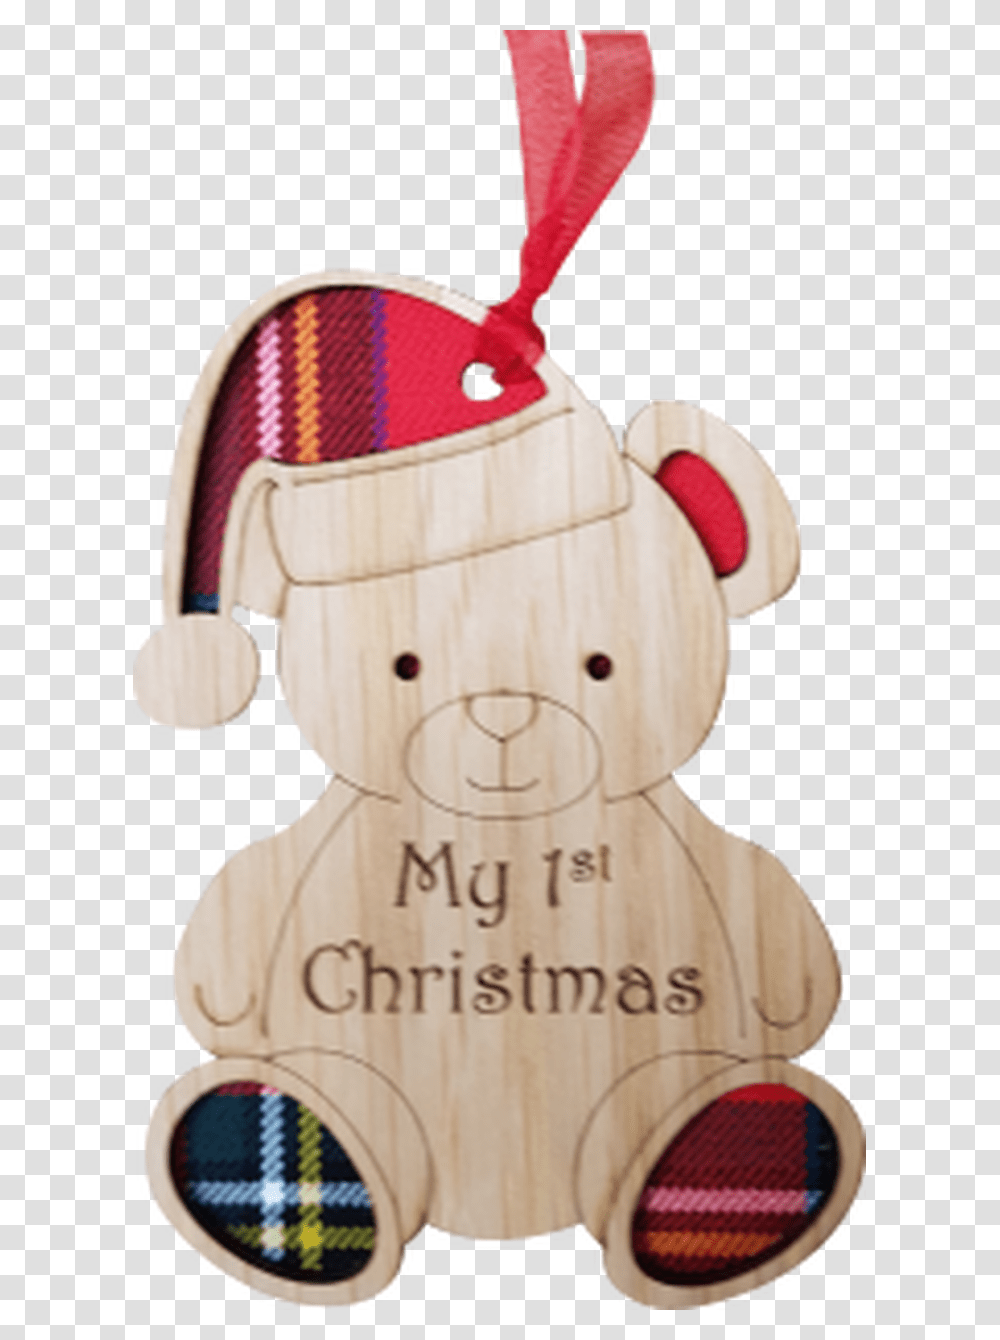 My 1st Christmas Teddy Bear, Toy, Label, Plush Transparent Png